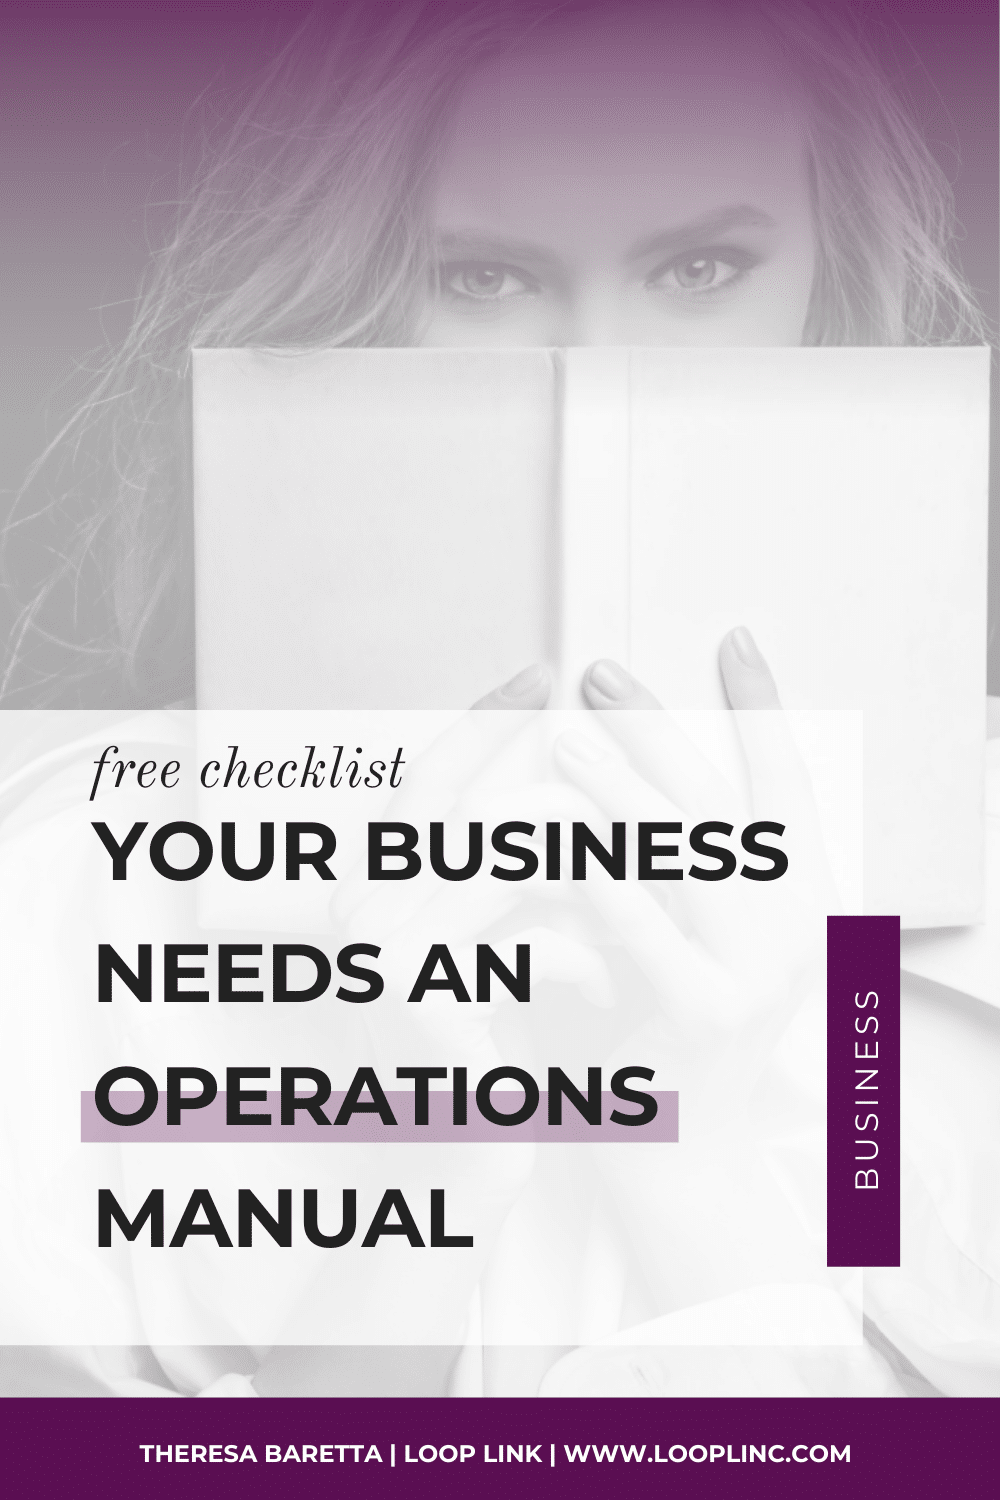 Your business needs an operations manual